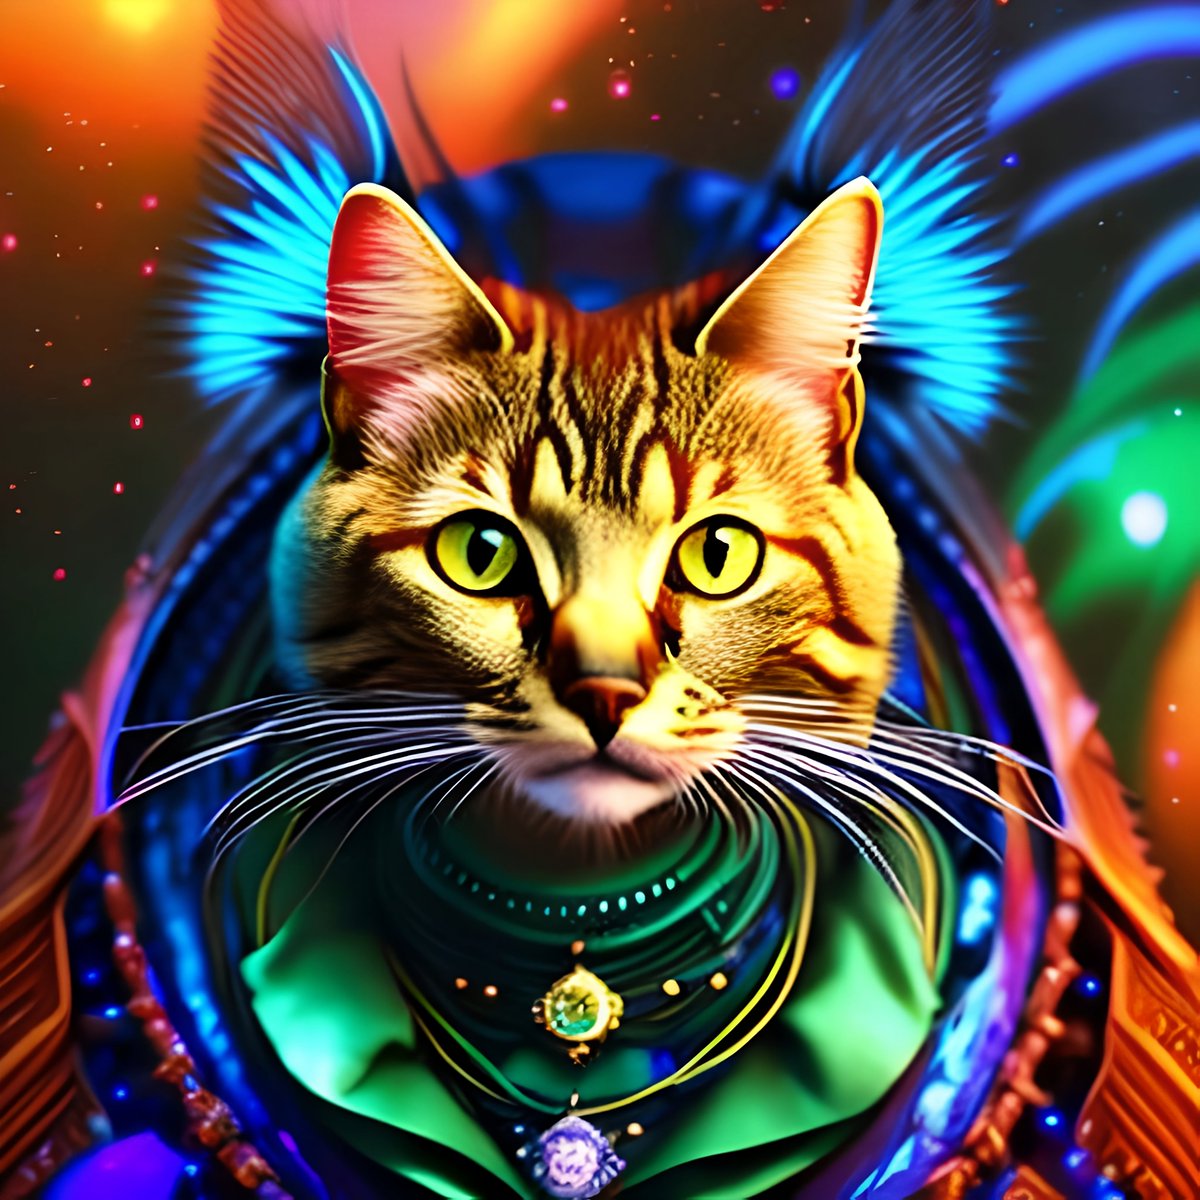 📸 Introducing an AI-Generated Design: 'Cat with Fancy Clothes in Vibrant Colors'! 🐱🎩🌈
#CatArt #PetFashion #AIGeneratedDesign #VibrantColors #ArtificialIntelligence #DigitalArt #WhimsicalDesign #FollowMe #CatLovers #PetInspiration